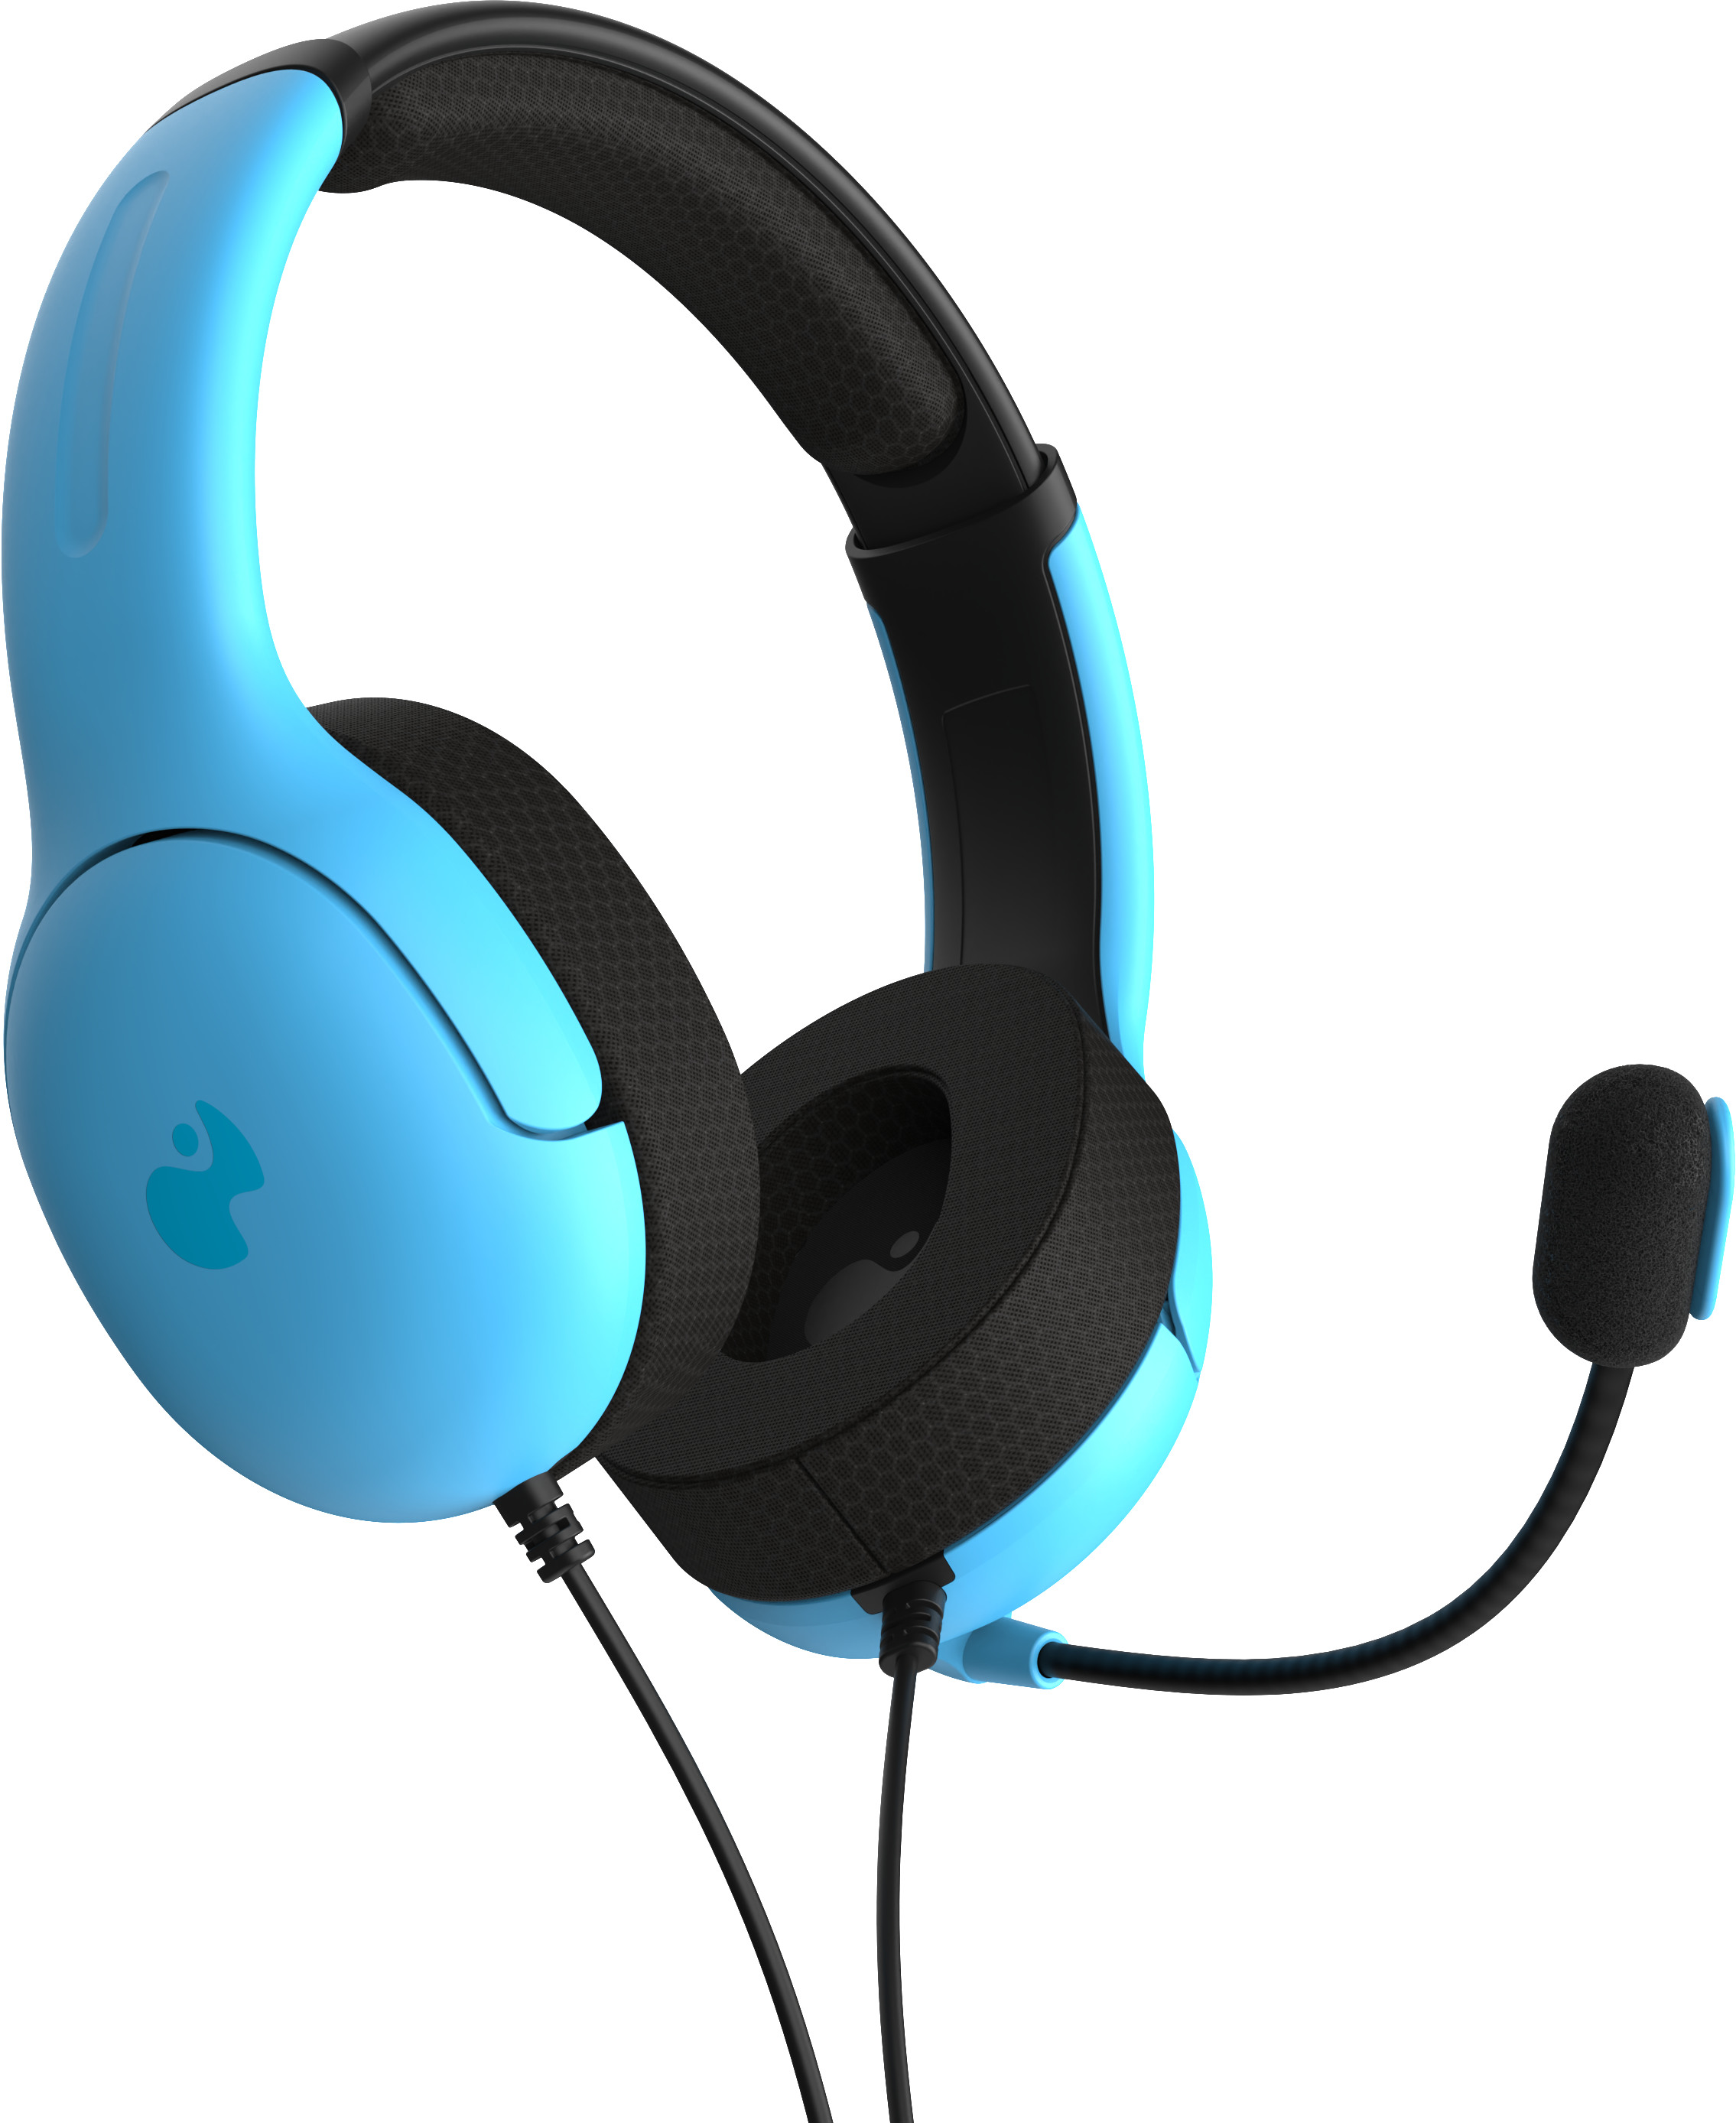 PDP Airlite Wired Stereo Headset 052-011-BL PS5, Neptune Blue